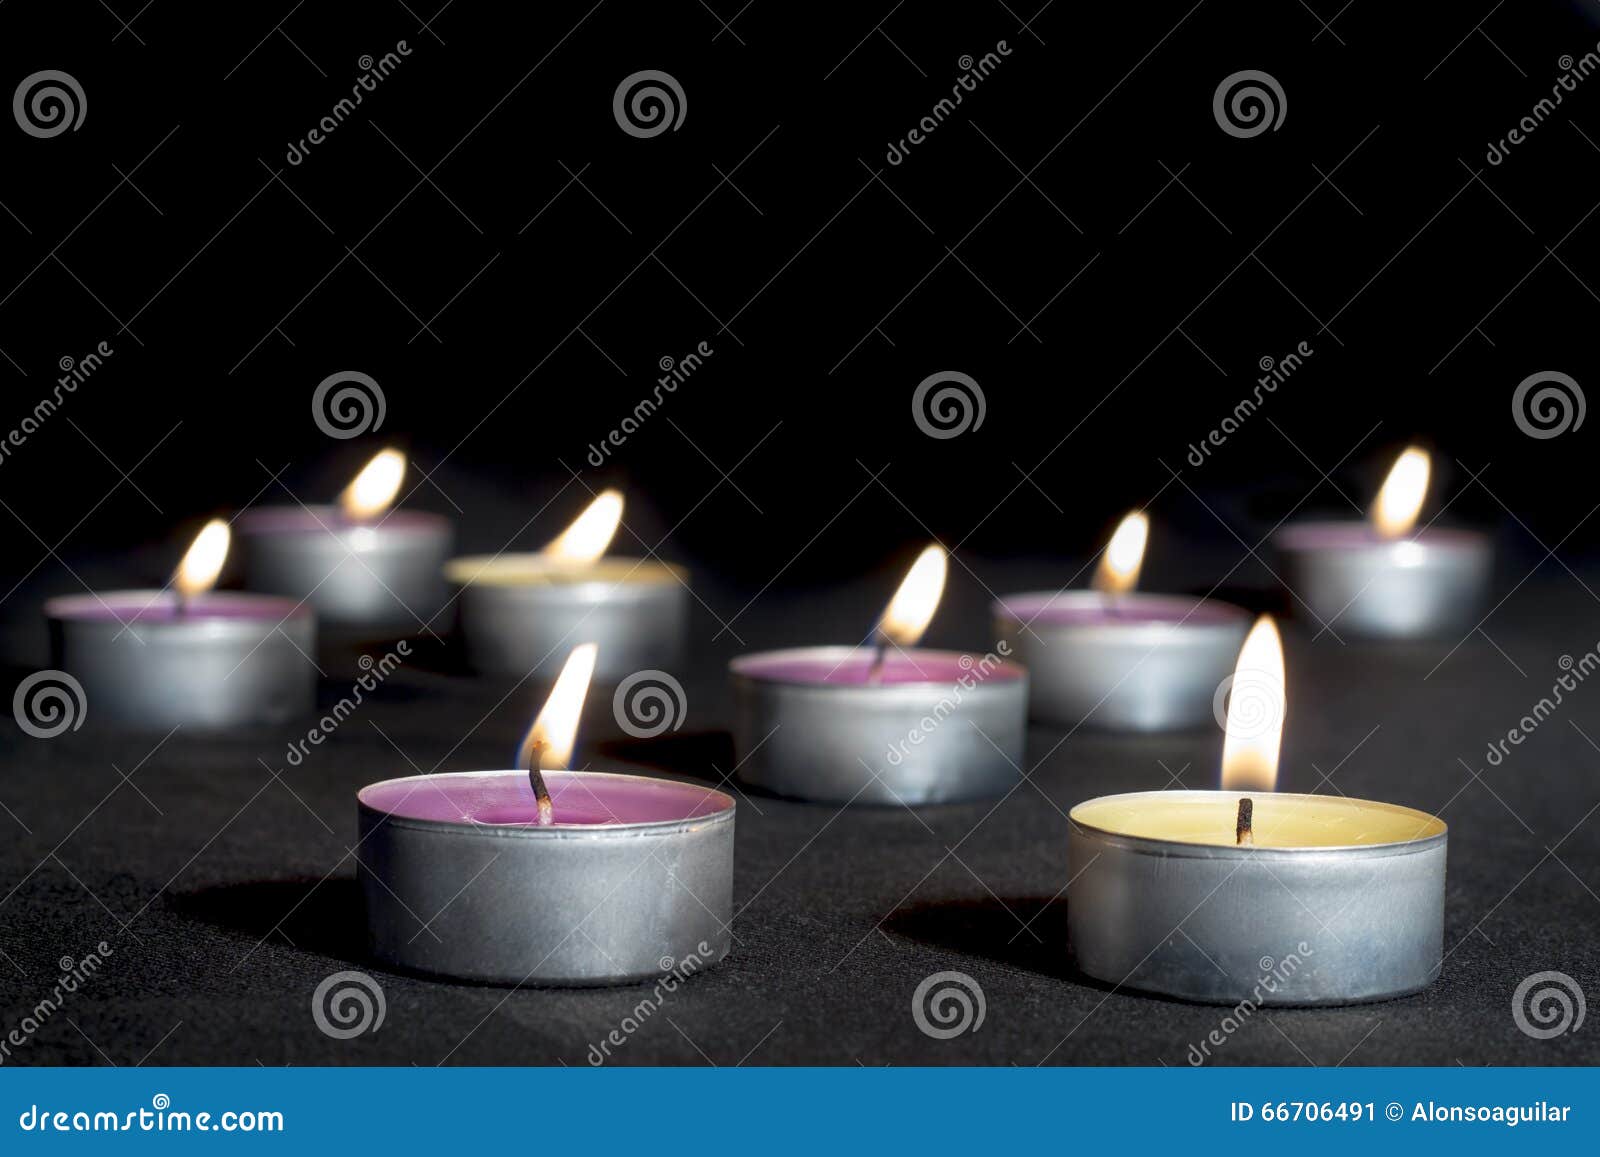 scented candles of different fragrances, on black